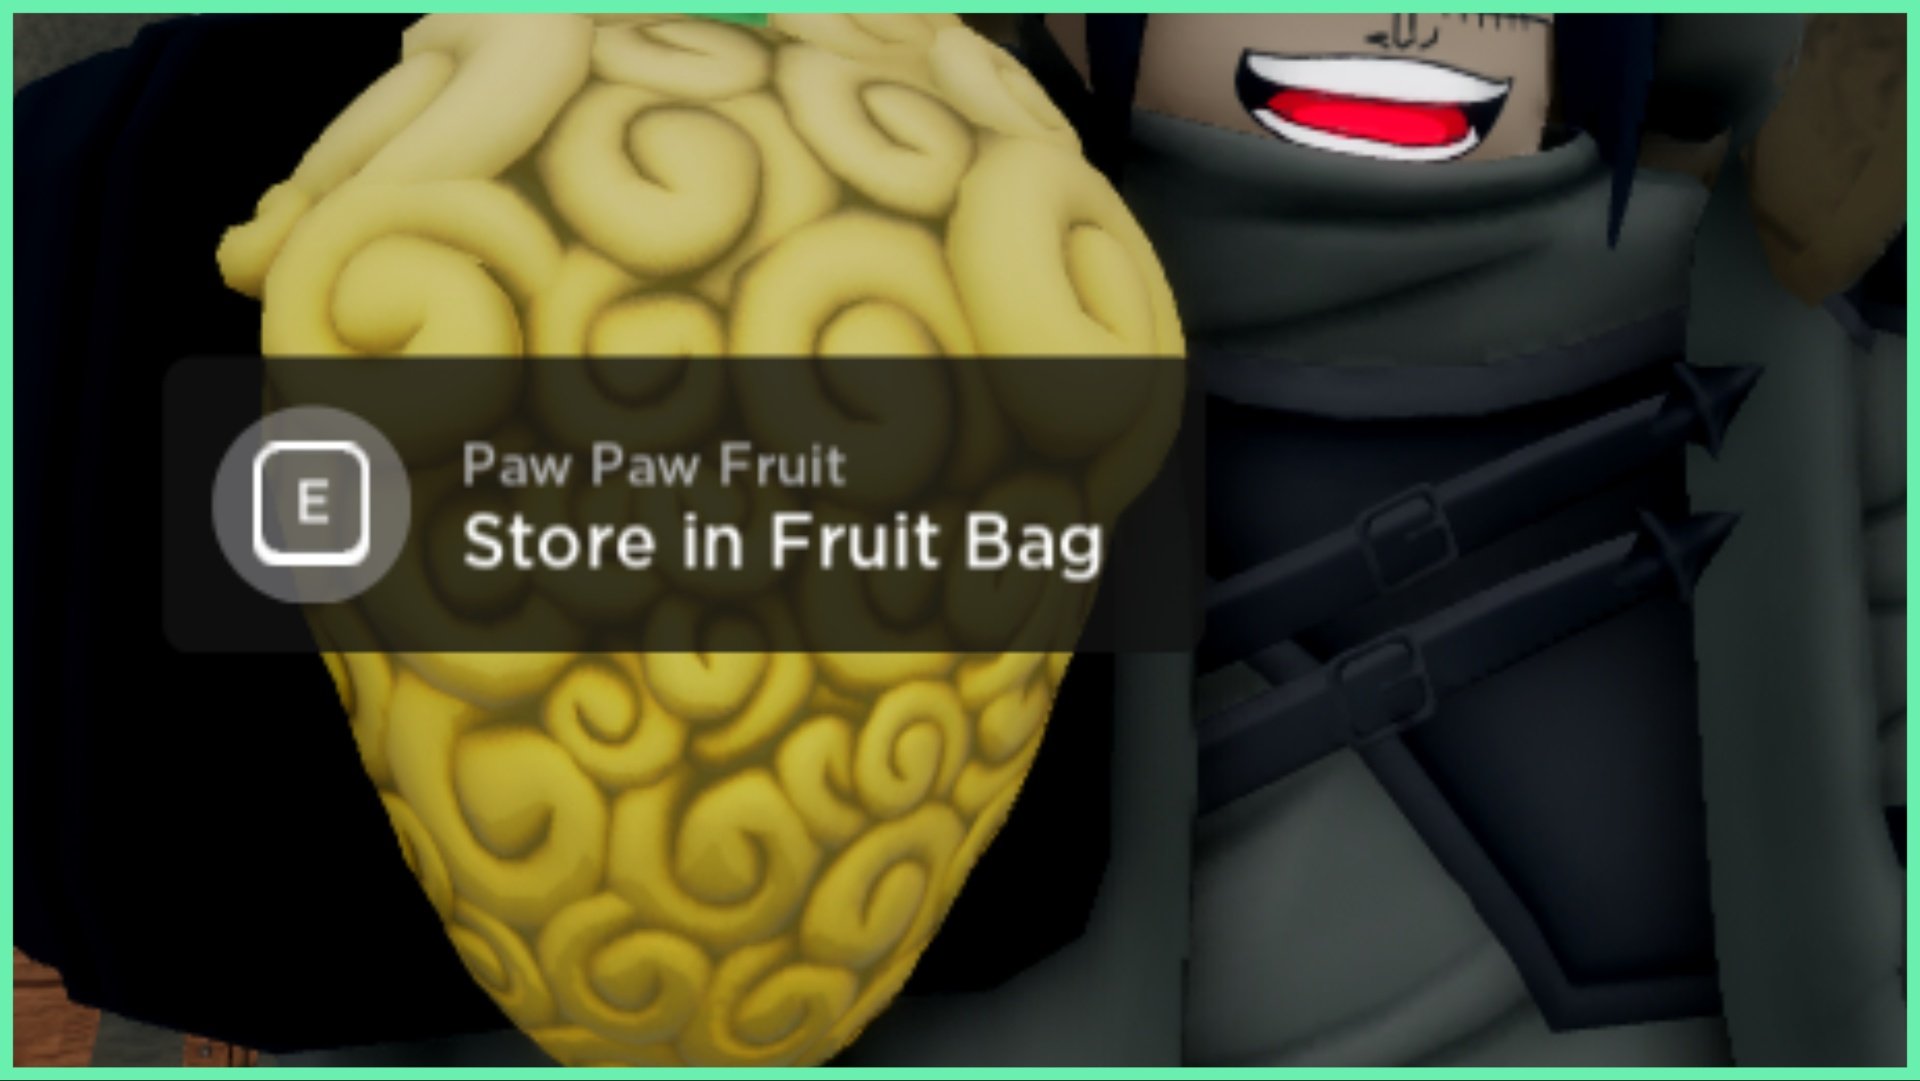 Feature image for our Legacy Piece Best Fruit Guide which shows an up close shot of a players hand holding my choice for the best fruit, the Paw Paw fruit. The fruit is yellow with multiple swirls on its exterior making an intricate pattern